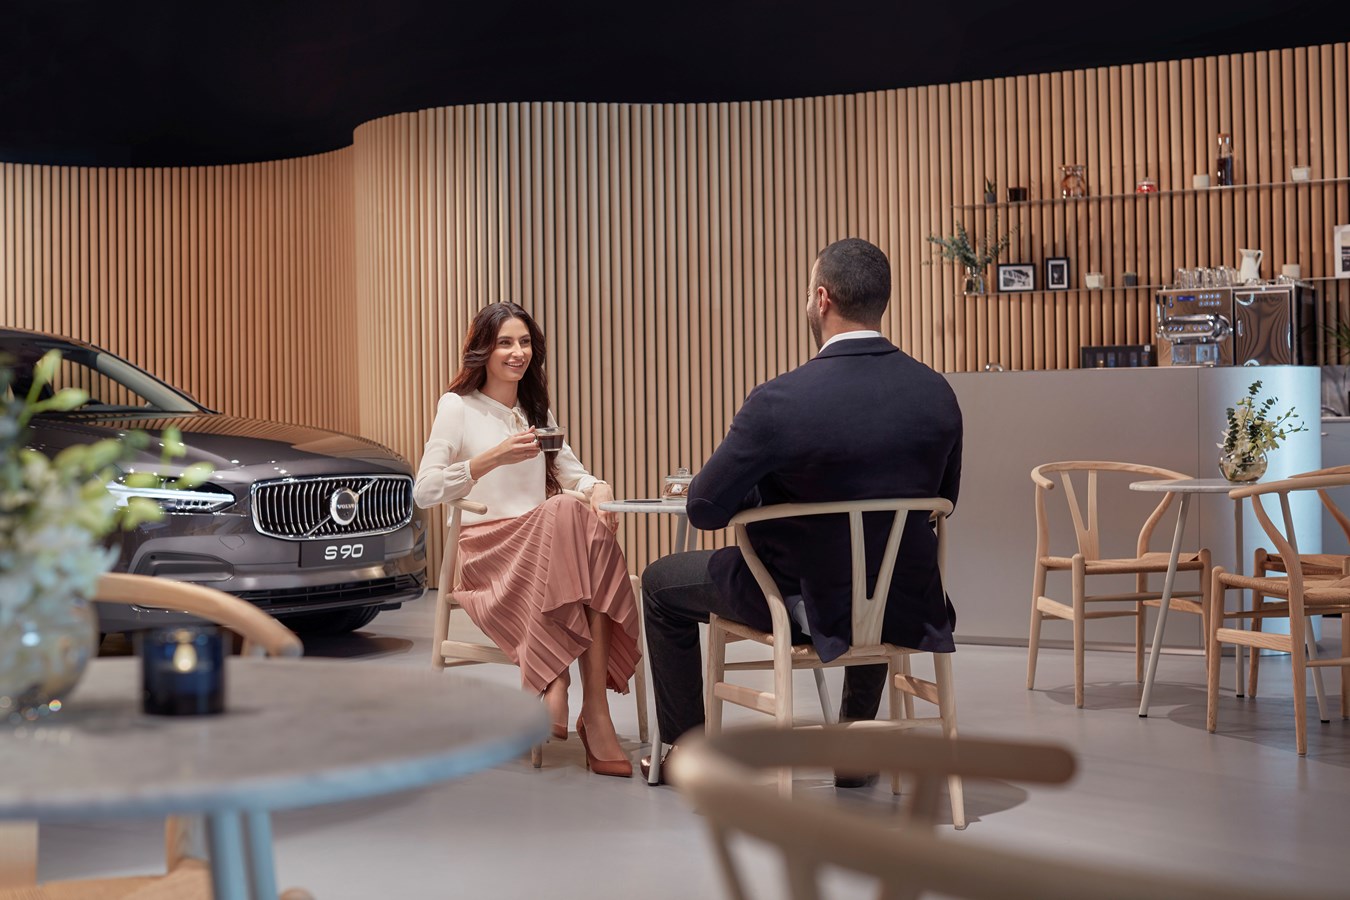 Volvo Cars set to deliver its all-electric future with transformative Middle East partnerships